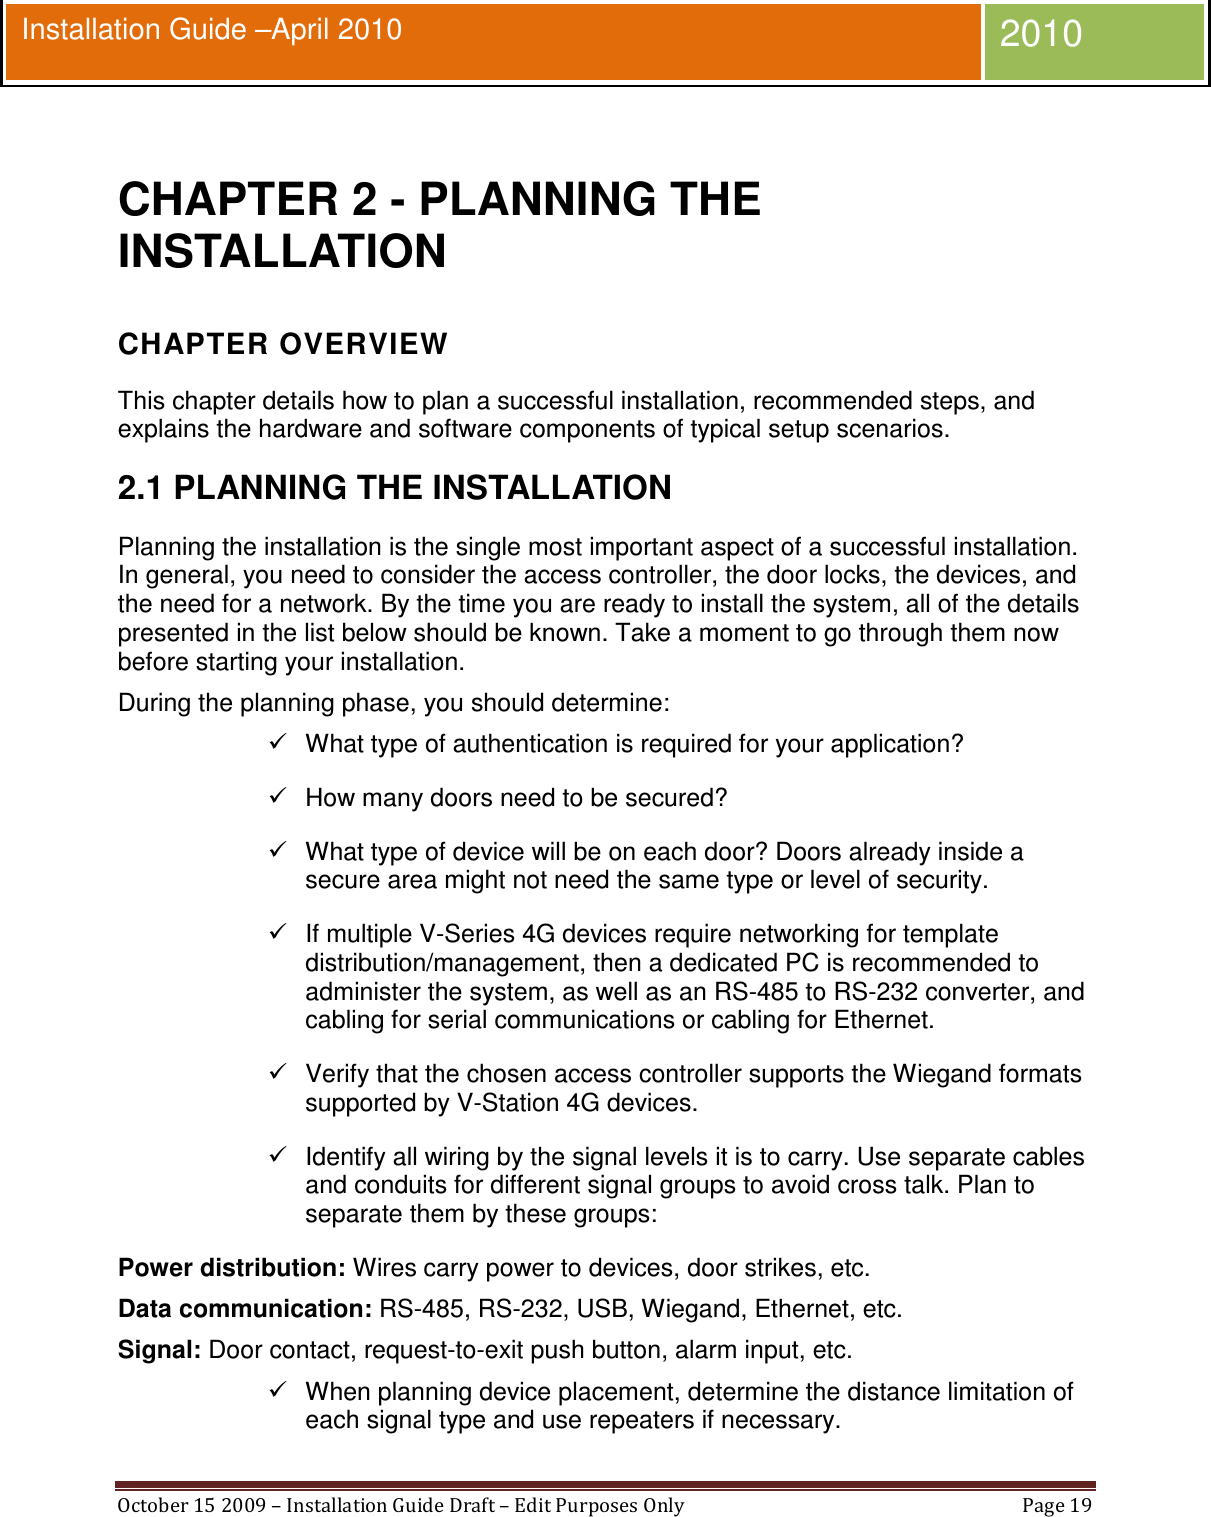  October 15 2009 – Installation Guide Draft – Edit Purposes Only  Page 19  Installation Guide –April 2010 2010  CHAPTER 2 - PLANNING THE INSTALLATION CHAPTER OVERVIEW This chapter details how to plan a successful installation, recommended steps, and explains the hardware and software components of typical setup scenarios. 2.1 PLANNING THE INSTALLATION Planning the installation is the single most important aspect of a successful installation. In general, you need to consider the access controller, the door locks, the devices, and the need for a network. By the time you are ready to install the system, all of the details presented in the list below should be known. Take a moment to go through them now before starting your installation. During the planning phase, you should determine:   What type of authentication is required for your application?   How many doors need to be secured?   What type of device will be on each door? Doors already inside a secure area might not need the same type or level of security.   If multiple V-Series 4G devices require networking for template distribution/management, then a dedicated PC is recommended to administer the system, as well as an RS-485 to RS-232 converter, and cabling for serial communications or cabling for Ethernet.   Verify that the chosen access controller supports the Wiegand formats supported by V-Station 4G devices.   Identify all wiring by the signal levels it is to carry. Use separate cables and conduits for different signal groups to avoid cross talk. Plan to separate them by these groups: Power distribution: Wires carry power to devices, door strikes, etc.  Data communication: RS-485, RS-232, USB, Wiegand, Ethernet, etc.  Signal: Door contact, request-to-exit push button, alarm input, etc.   When planning device placement, determine the distance limitation of each signal type and use repeaters if necessary. 